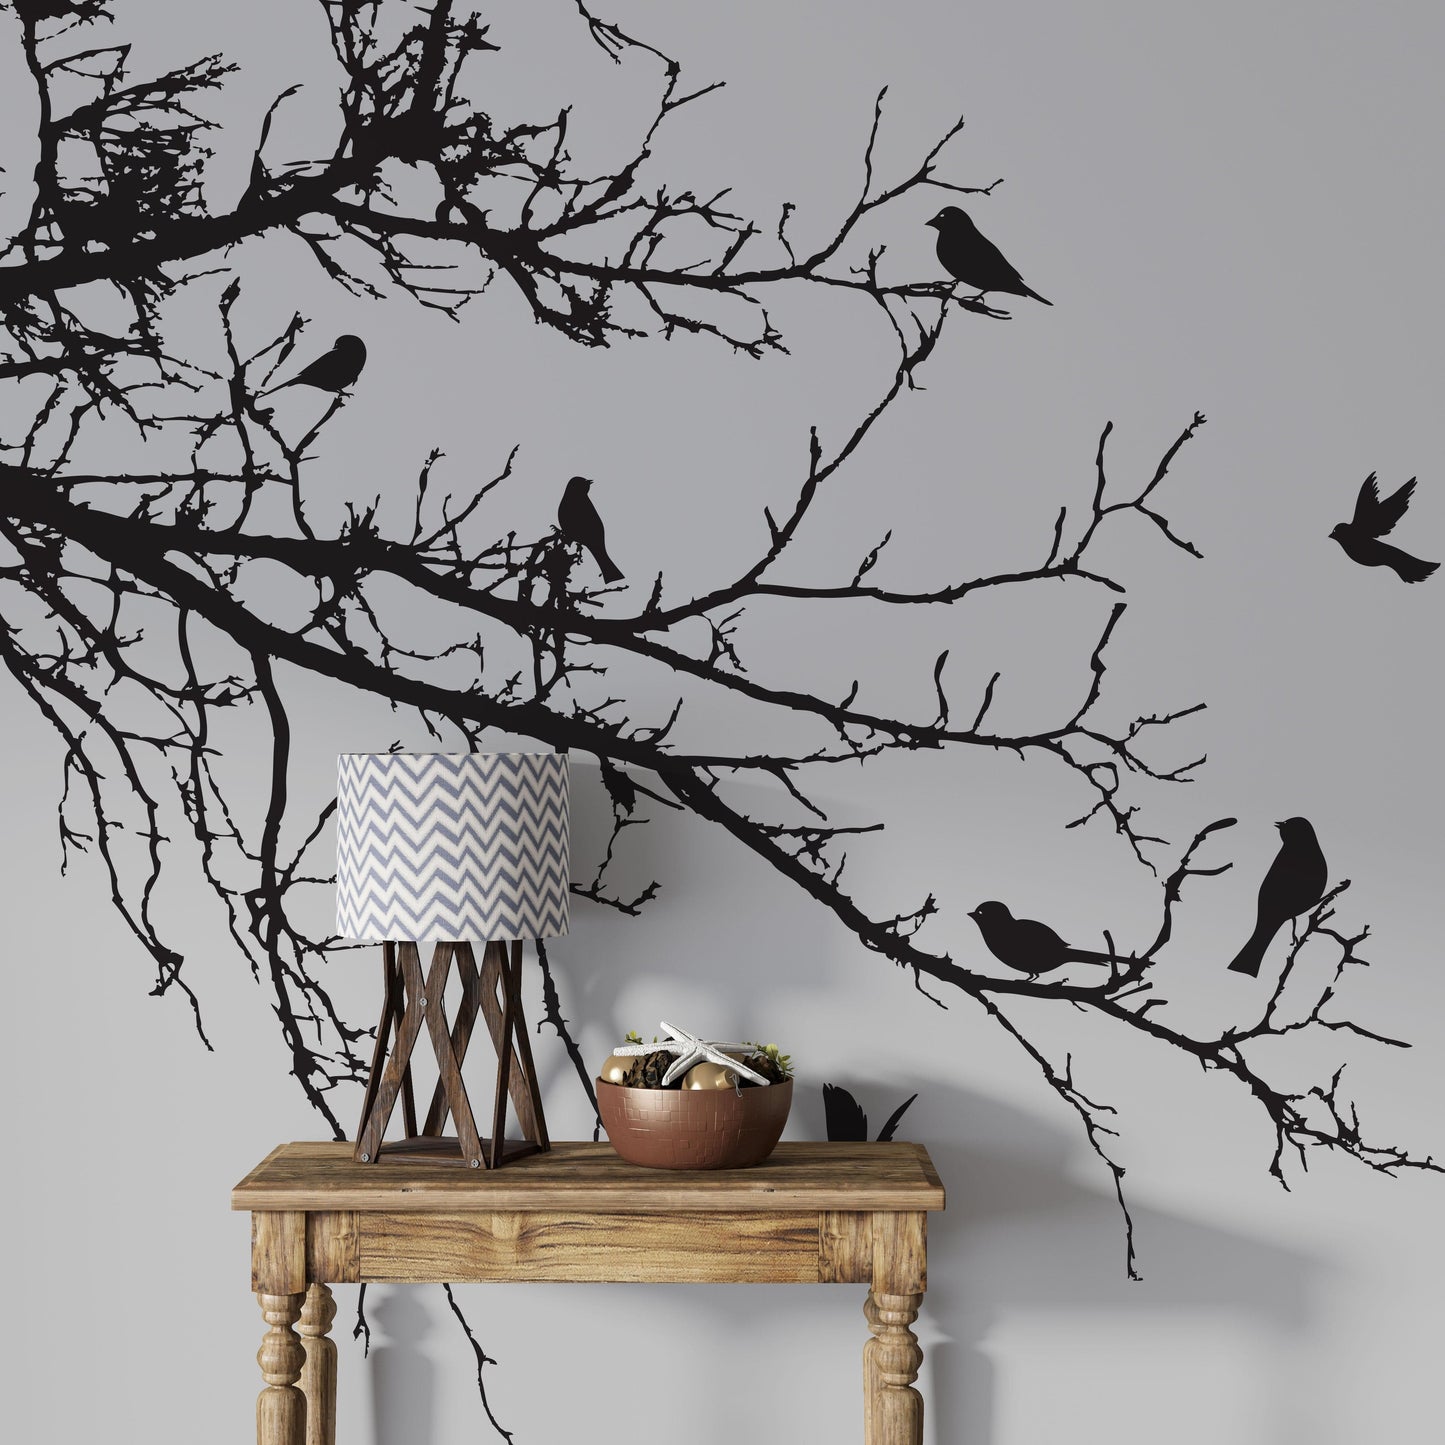 Black decal of 8 birds on tree branches on a white wall above a brown table.